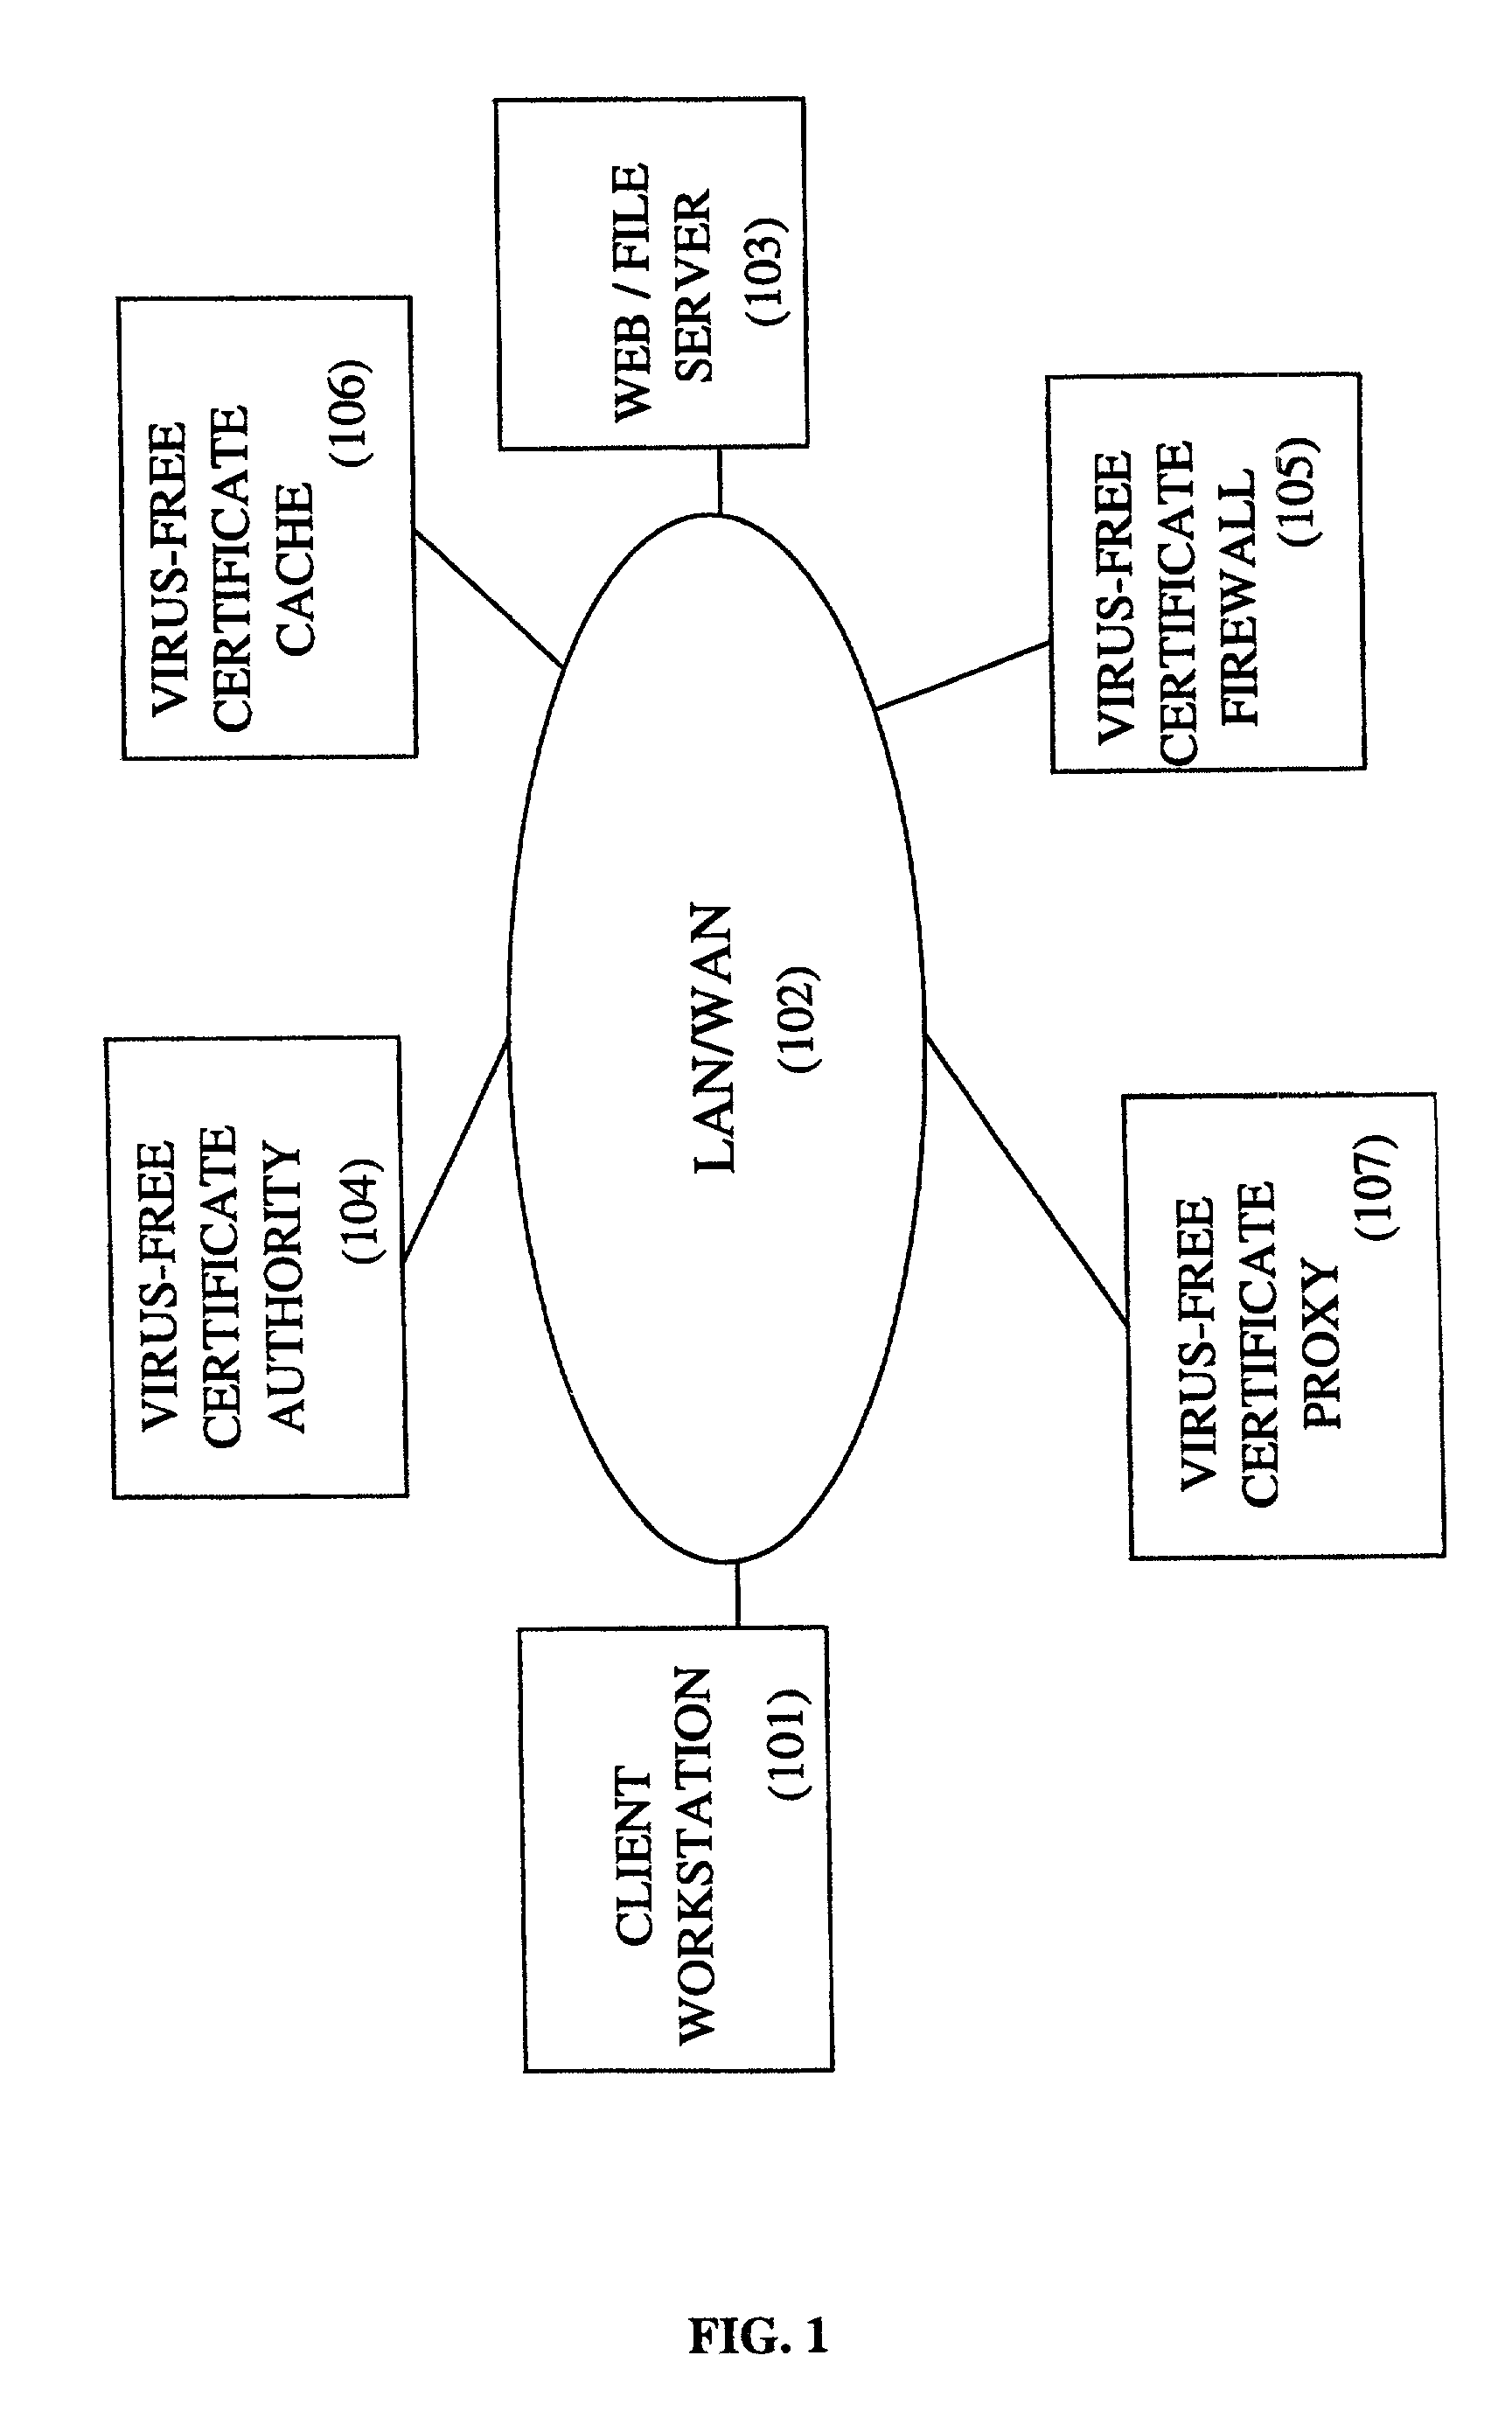 Method and system for caching virus-free file certificates